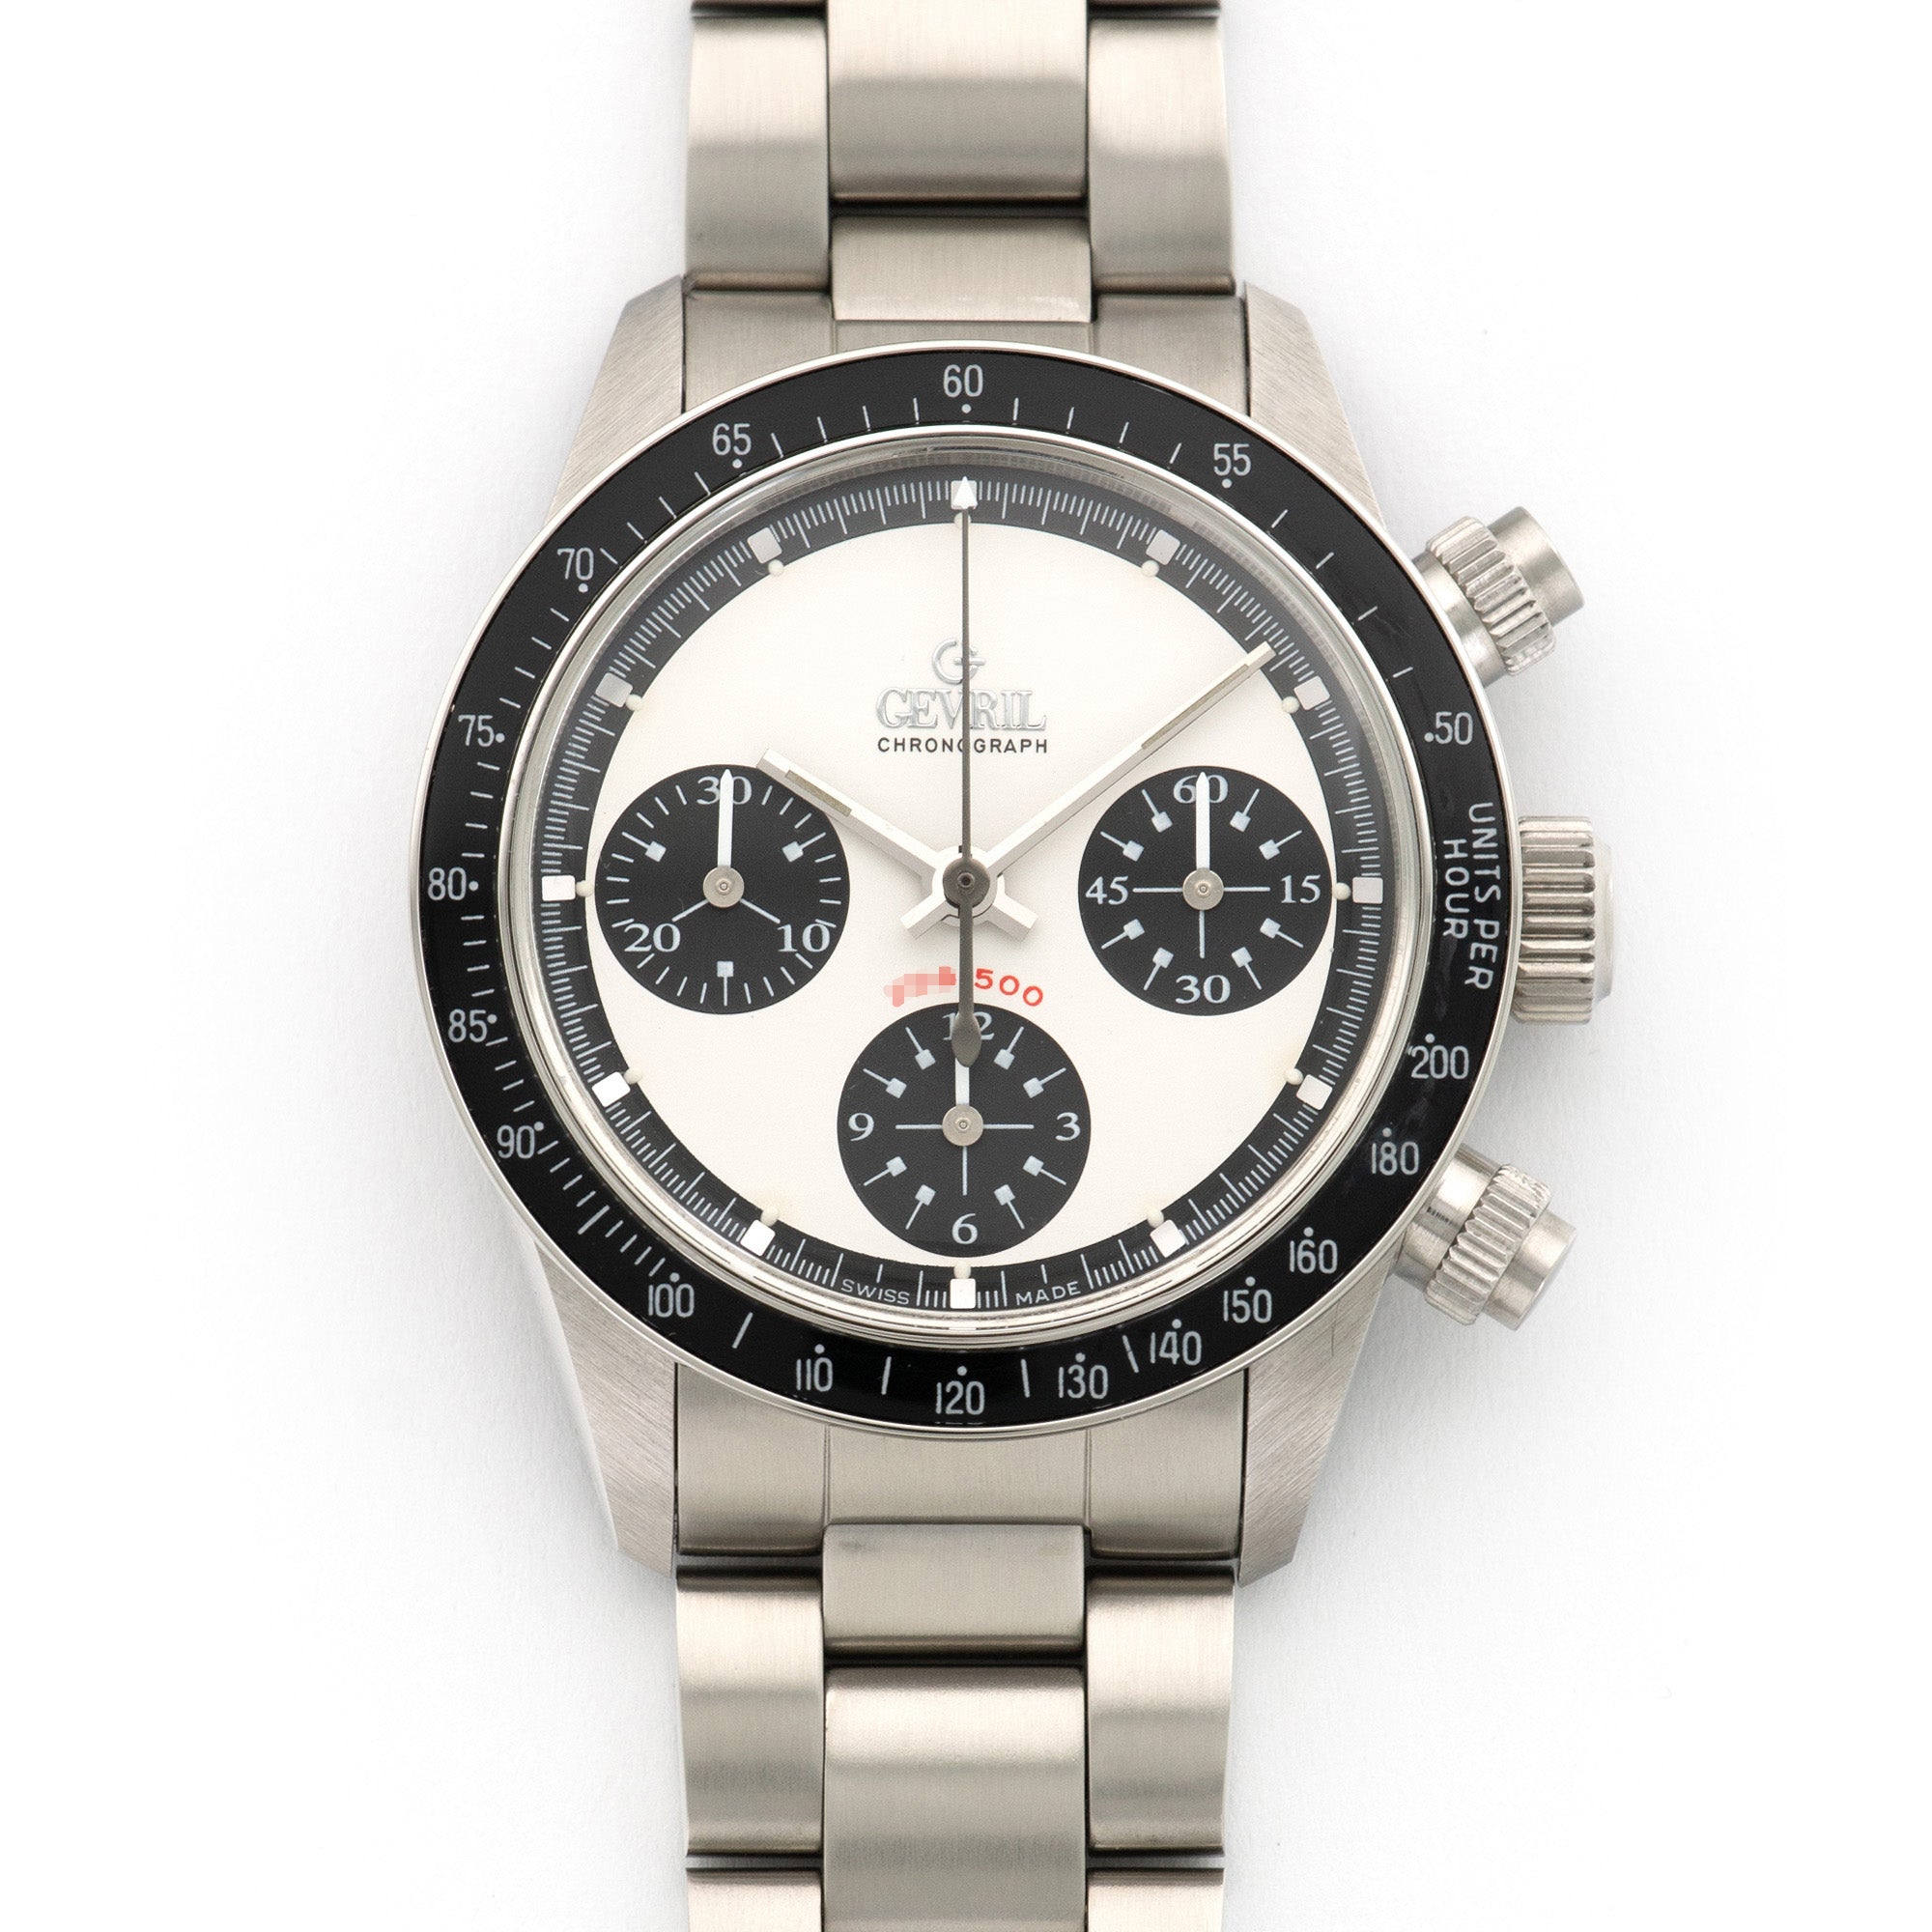 Gevril - Gevril Steel Tribeca Paul Newman Chronograph Watch - The Keystone Watches